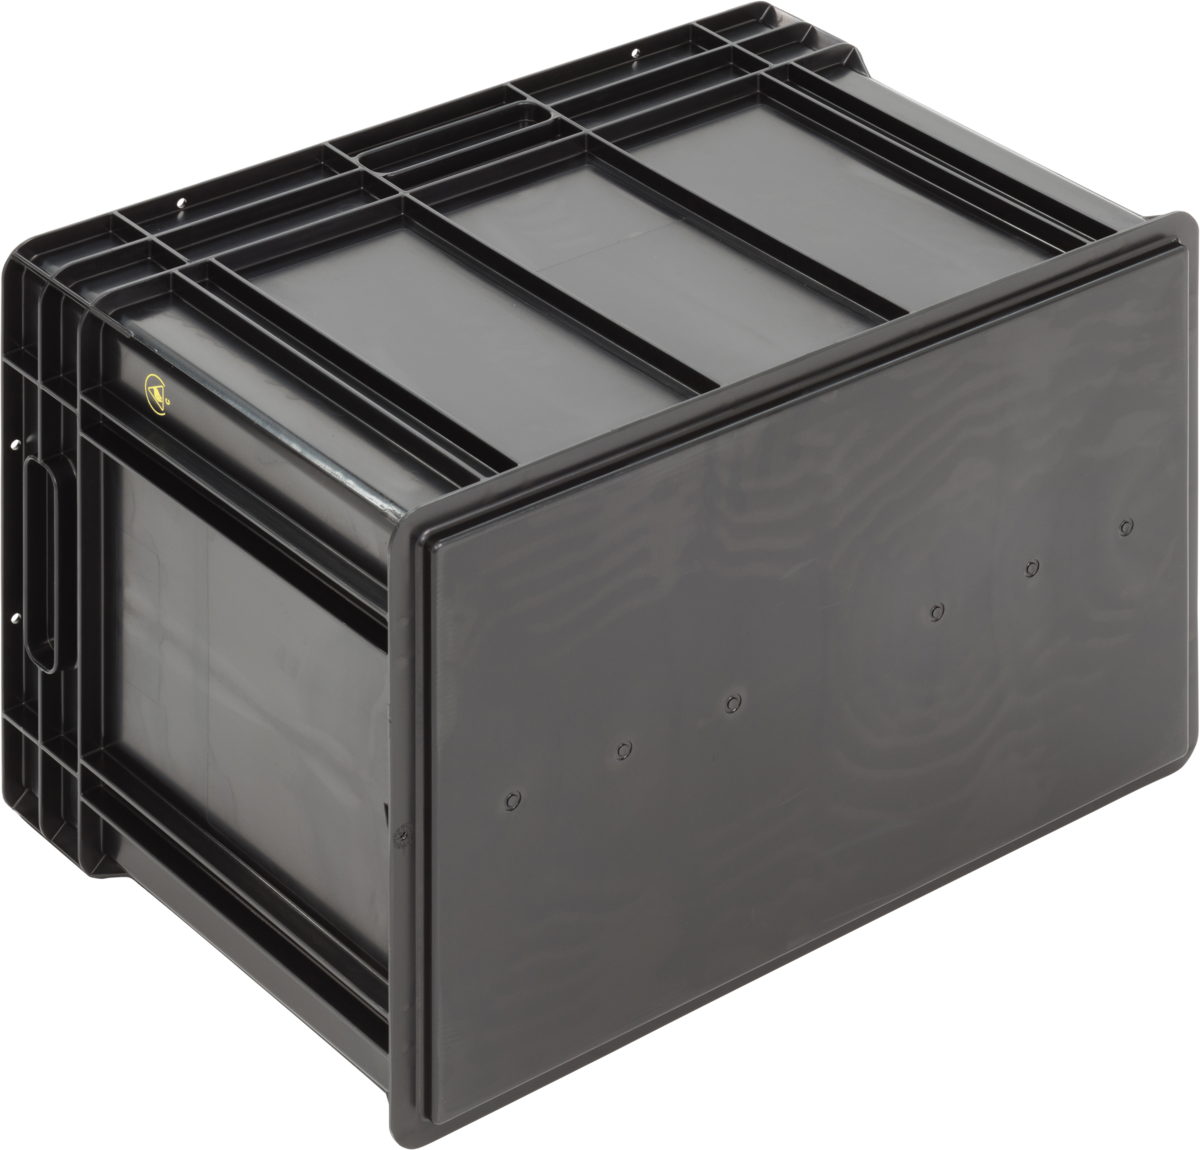 ESD-Safe-SGL-Norm-Stacking-Bin-Containers-Flat-Base-Ref.-6440.007.992_1004529_600x400x412_02